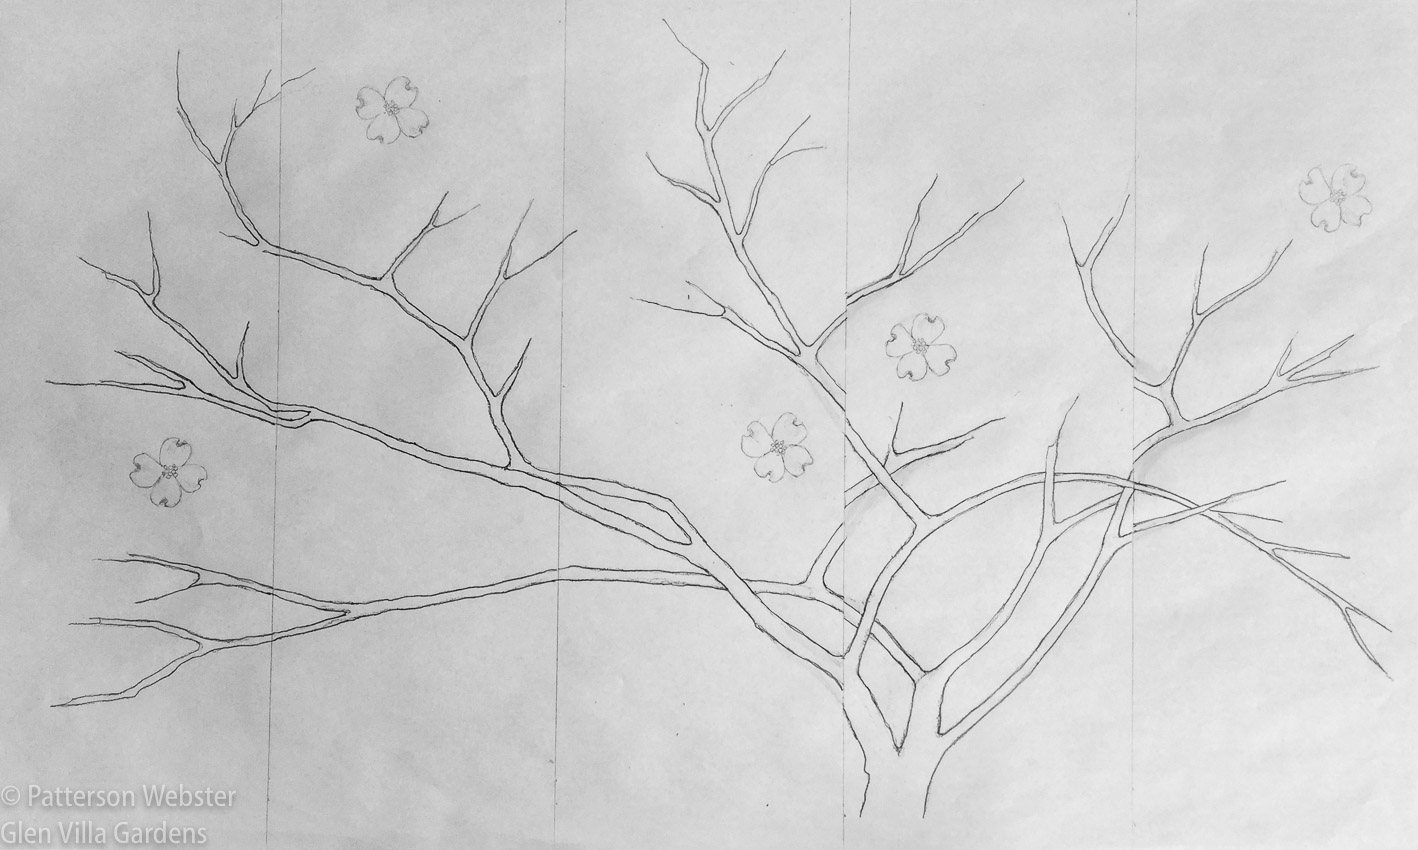 Mary Martha Guy's design shows the bare outline of the tree, with five over-sized dogwood flowers positioned in a gentle curve.